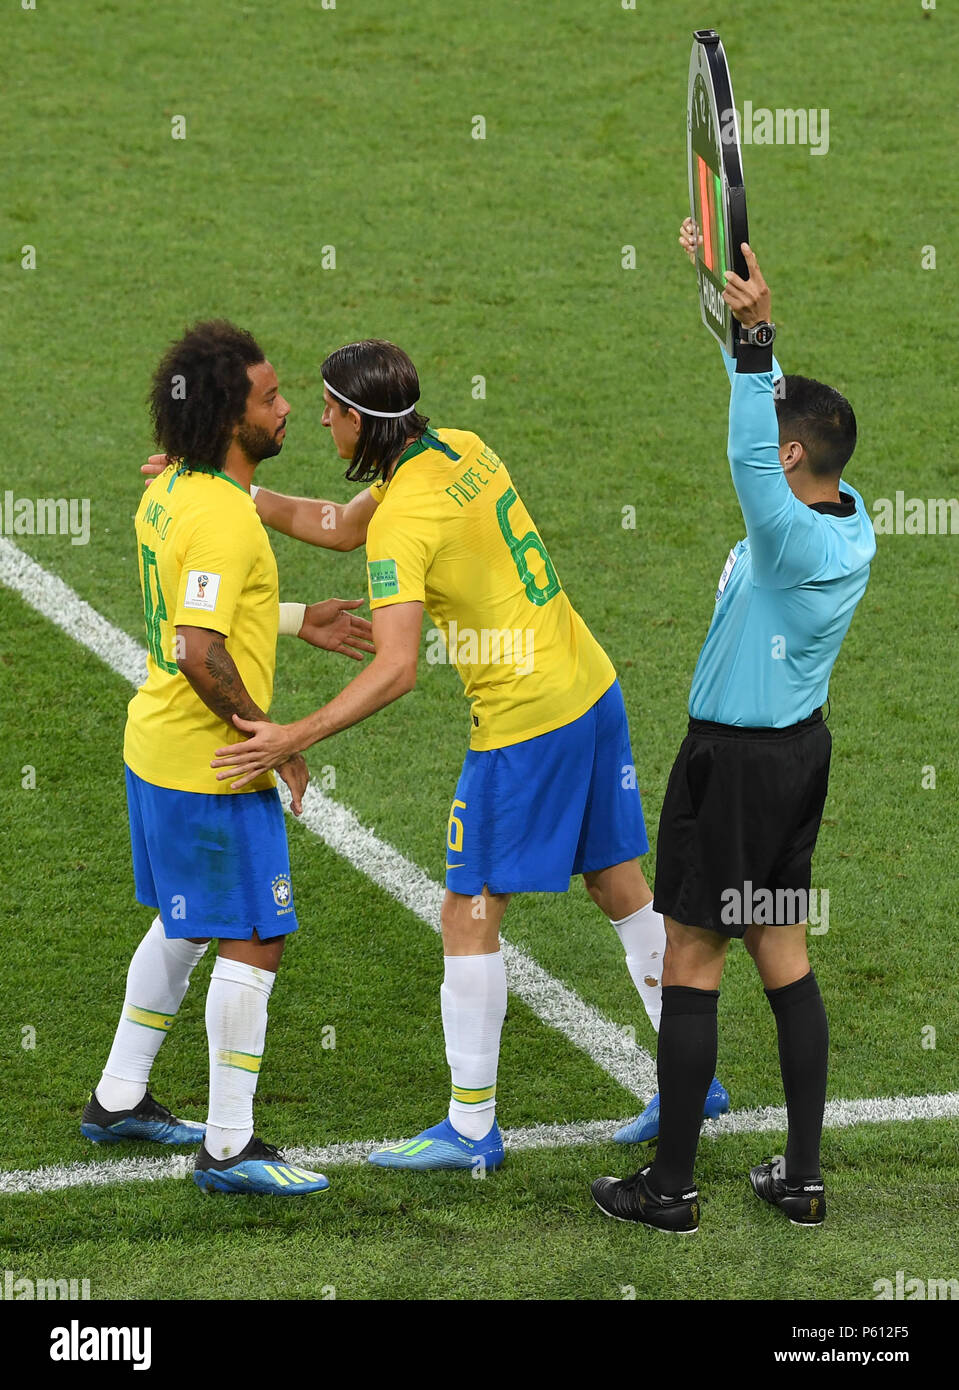 Moscow, Russia. 27th June, 2018. Marcelo (L) of Brazil is substituted off after his injury during the 2018 FIFA World Cup Group E match between Brazil and Serbia in Moscow, Russia, June 27, 2018. Credit: Wang Yuguo/Xinhua/Alamy Live News Stock Photo